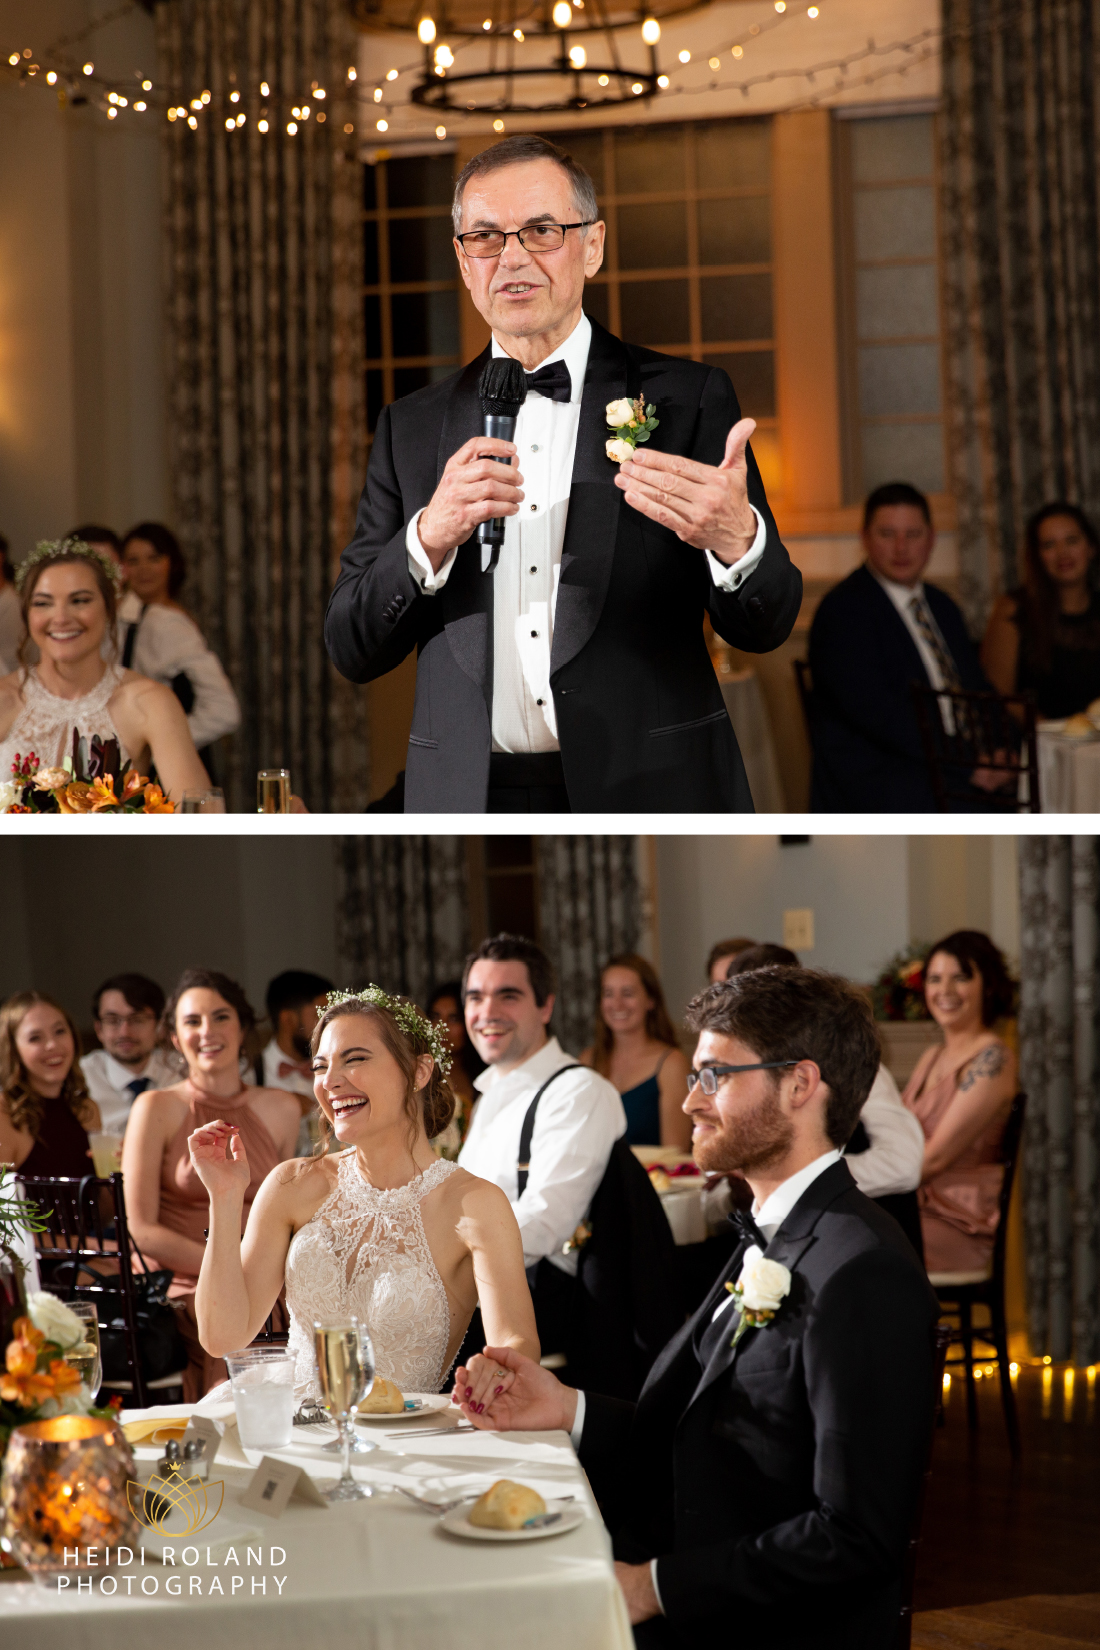 Family members giving toasts during wedding reception while bride and groom watch and laugh